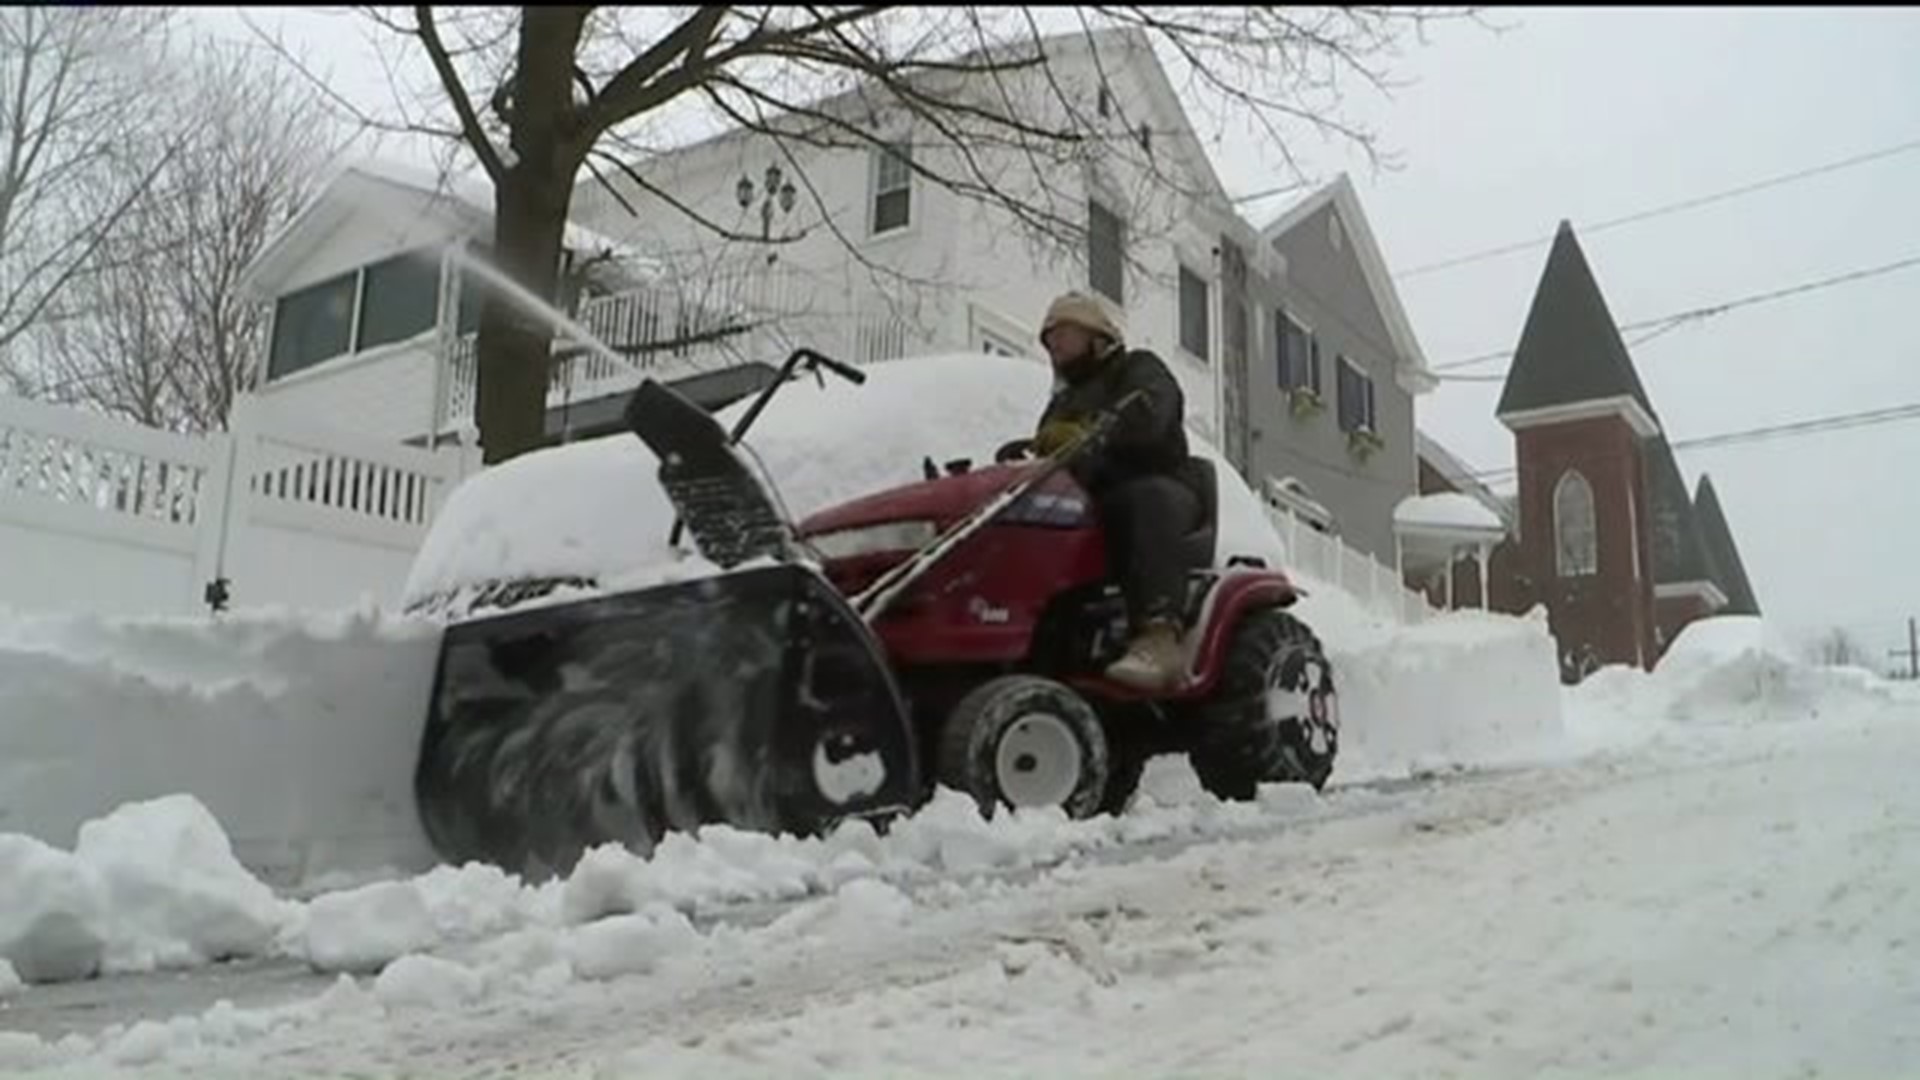 Mount Carmel Neighbors Pitch In to Dig Out